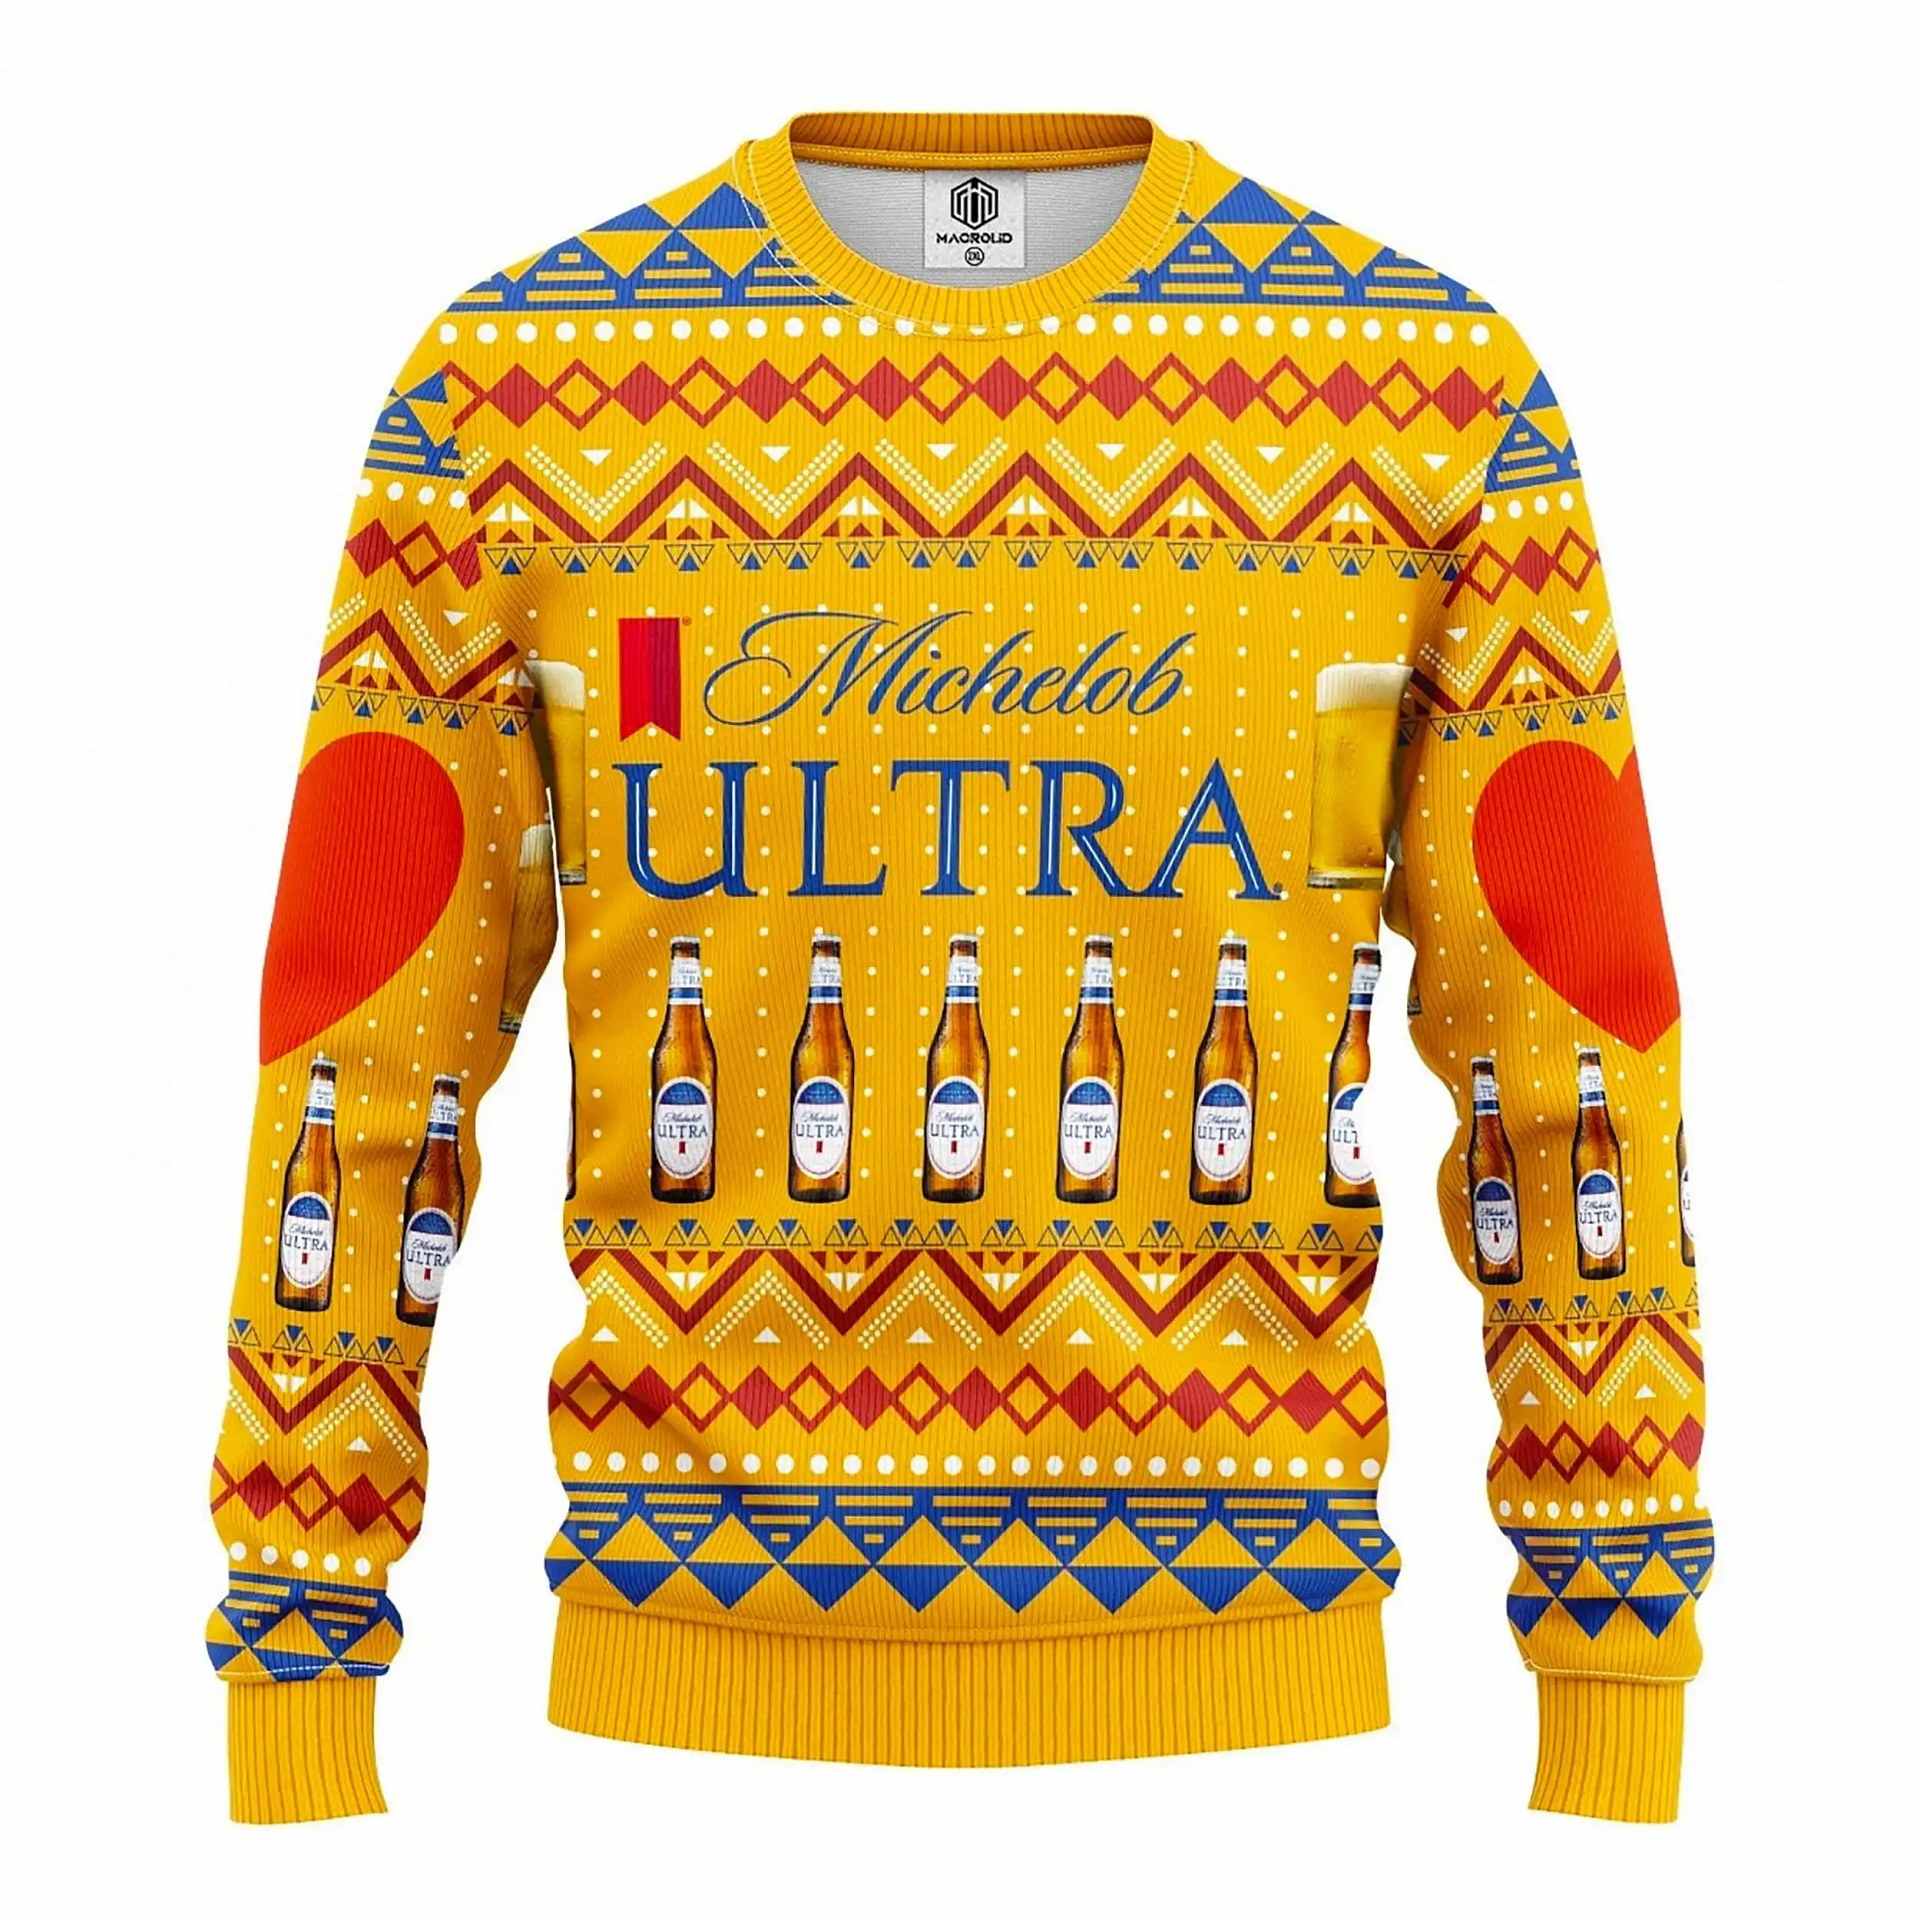 Michelob Ultra Knitted Xmas Best Holiday Gifts Ugly Sweater